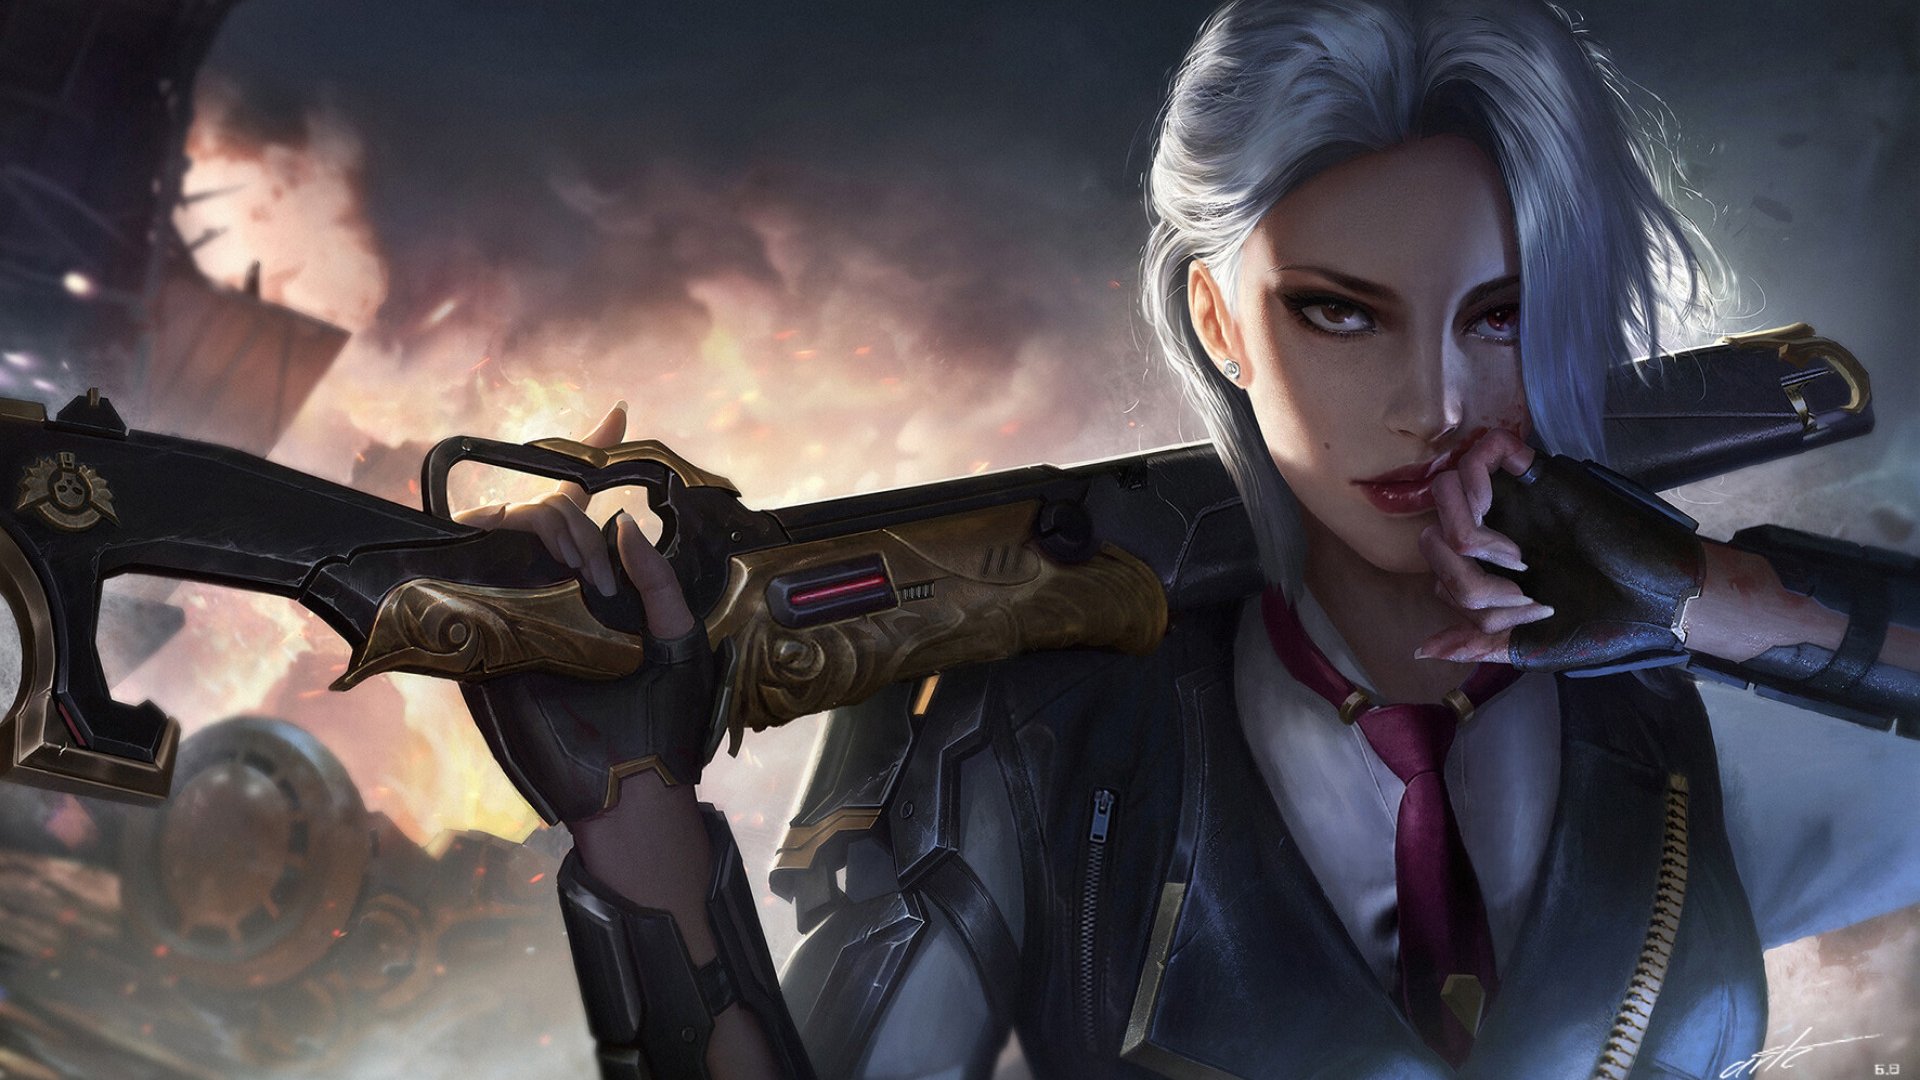 Wallpapers of Ashe, Overwatch, Video Game backgrounds & HD image.